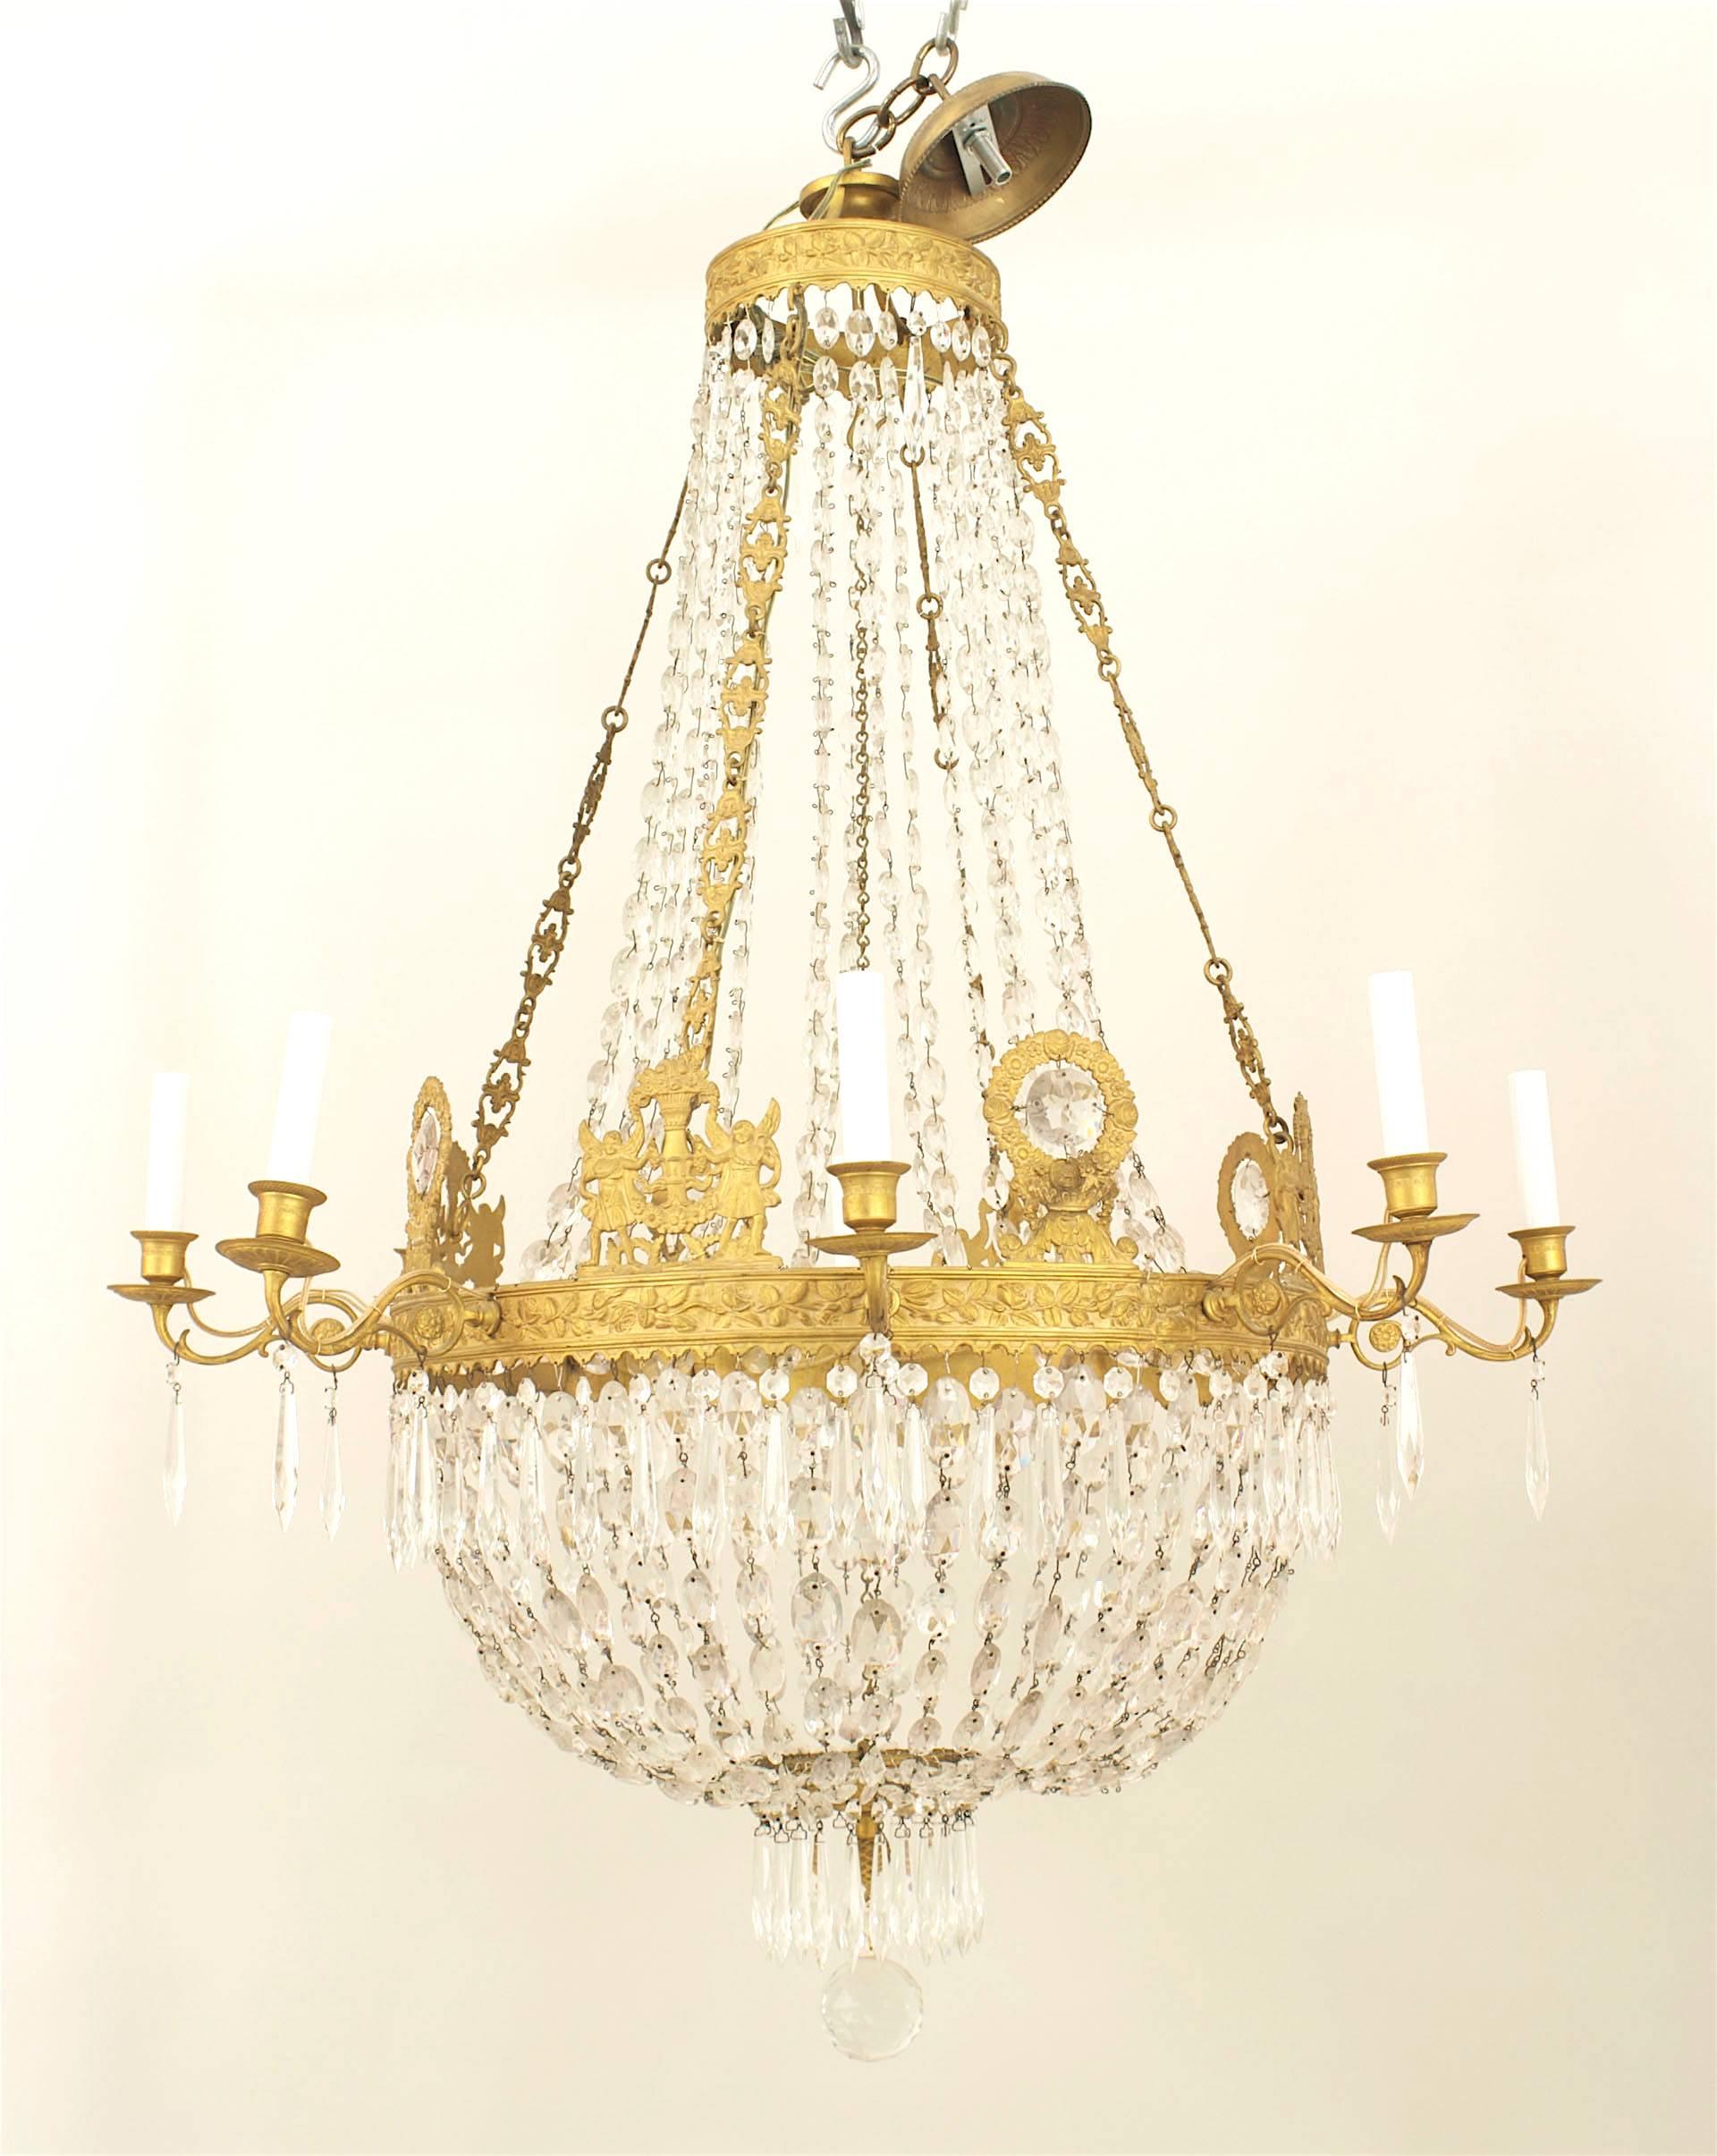 French Empire (circa 1810) gilt bronze and cut glass chandelier with cut crystal strands emanating from a gilt bronze center ring with 8 arms.
